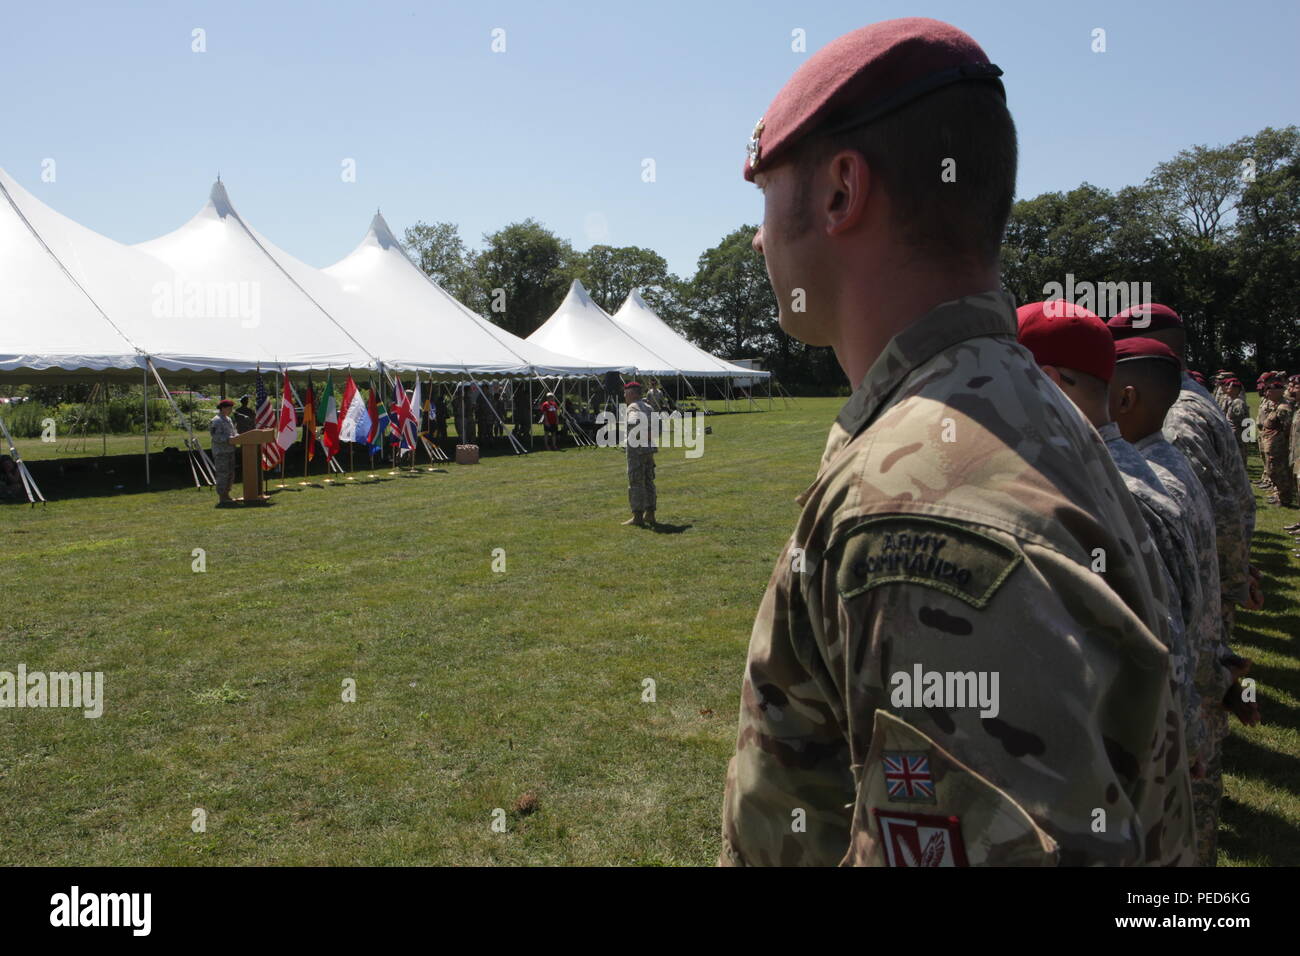 The wing pinning ceremony is seen over the shoulder of United Kingdom paratrooper Cpl. Jim Christie from the 7th PARA, Royal Horse Artillery, during the wing exchange ceremony in West Kingston, R.I., Aug. 3, 2015.  Leapfest is an International parachute competition hosted by the 56th Troop Command, Rhode Island National Guard to promote high level technical training and esprit de corps within the International Airborne community. (U.S. Army Photo by Sgt. 1st Class Horace Murray/Released) Stock Photo